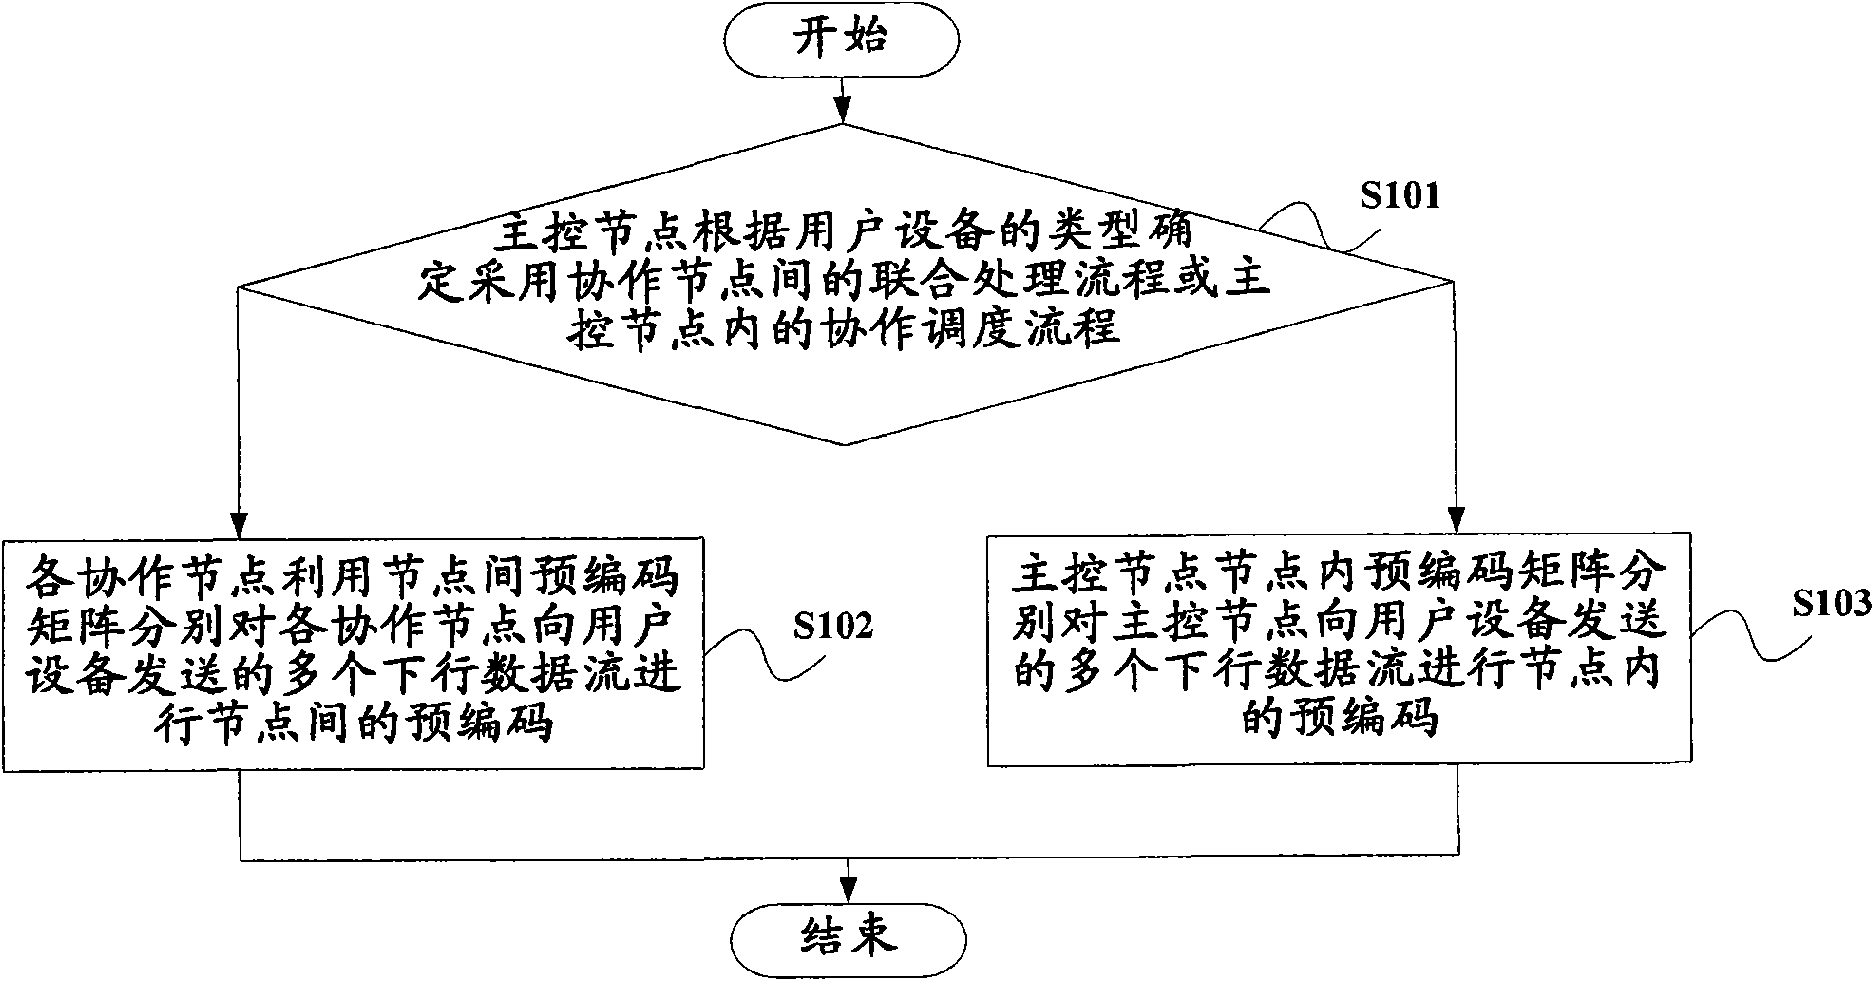 Method and system for pre-treating downlink transmission in cooperative communication